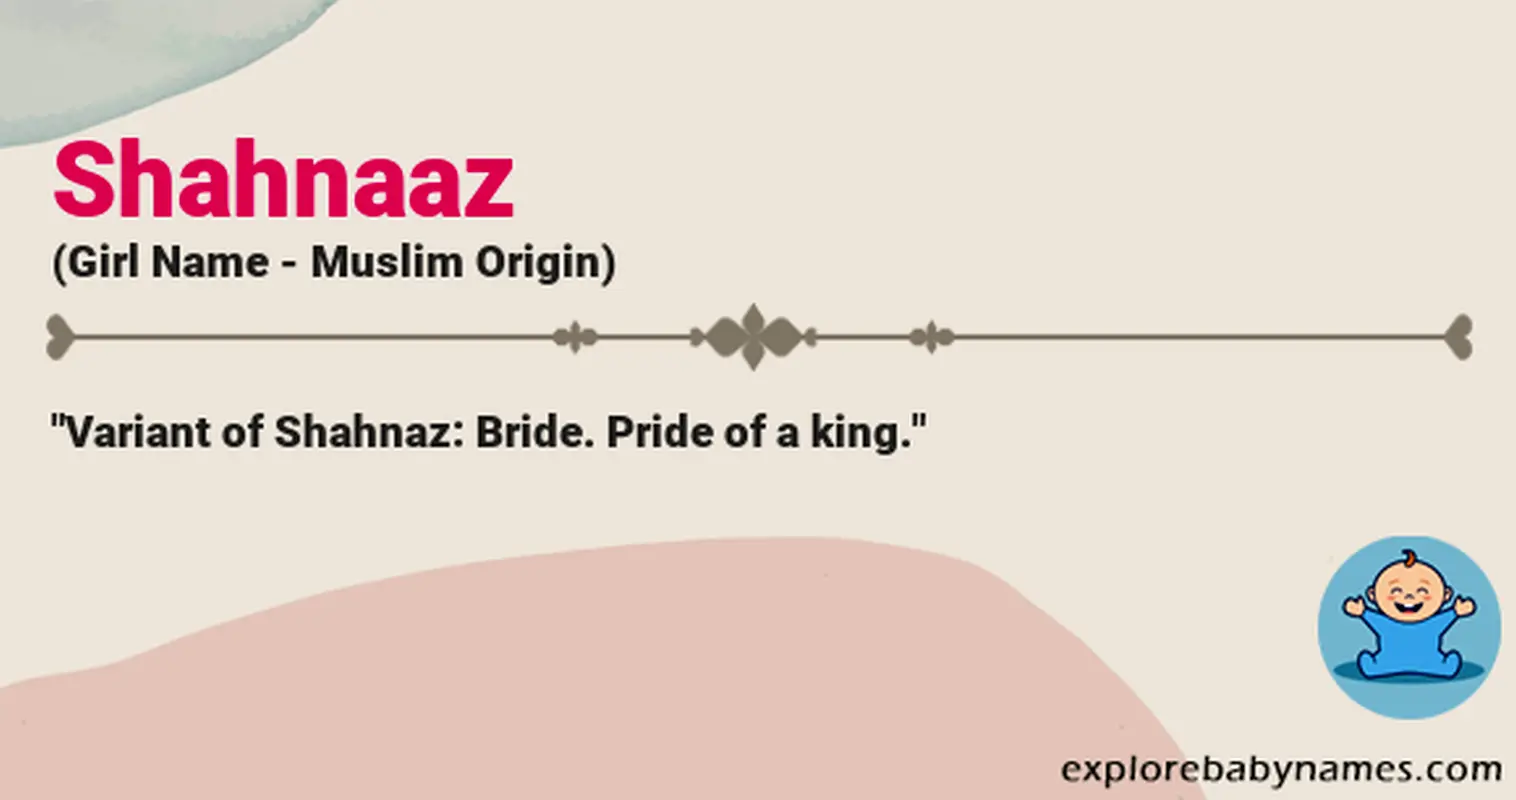 Meaning of Shahnaaz